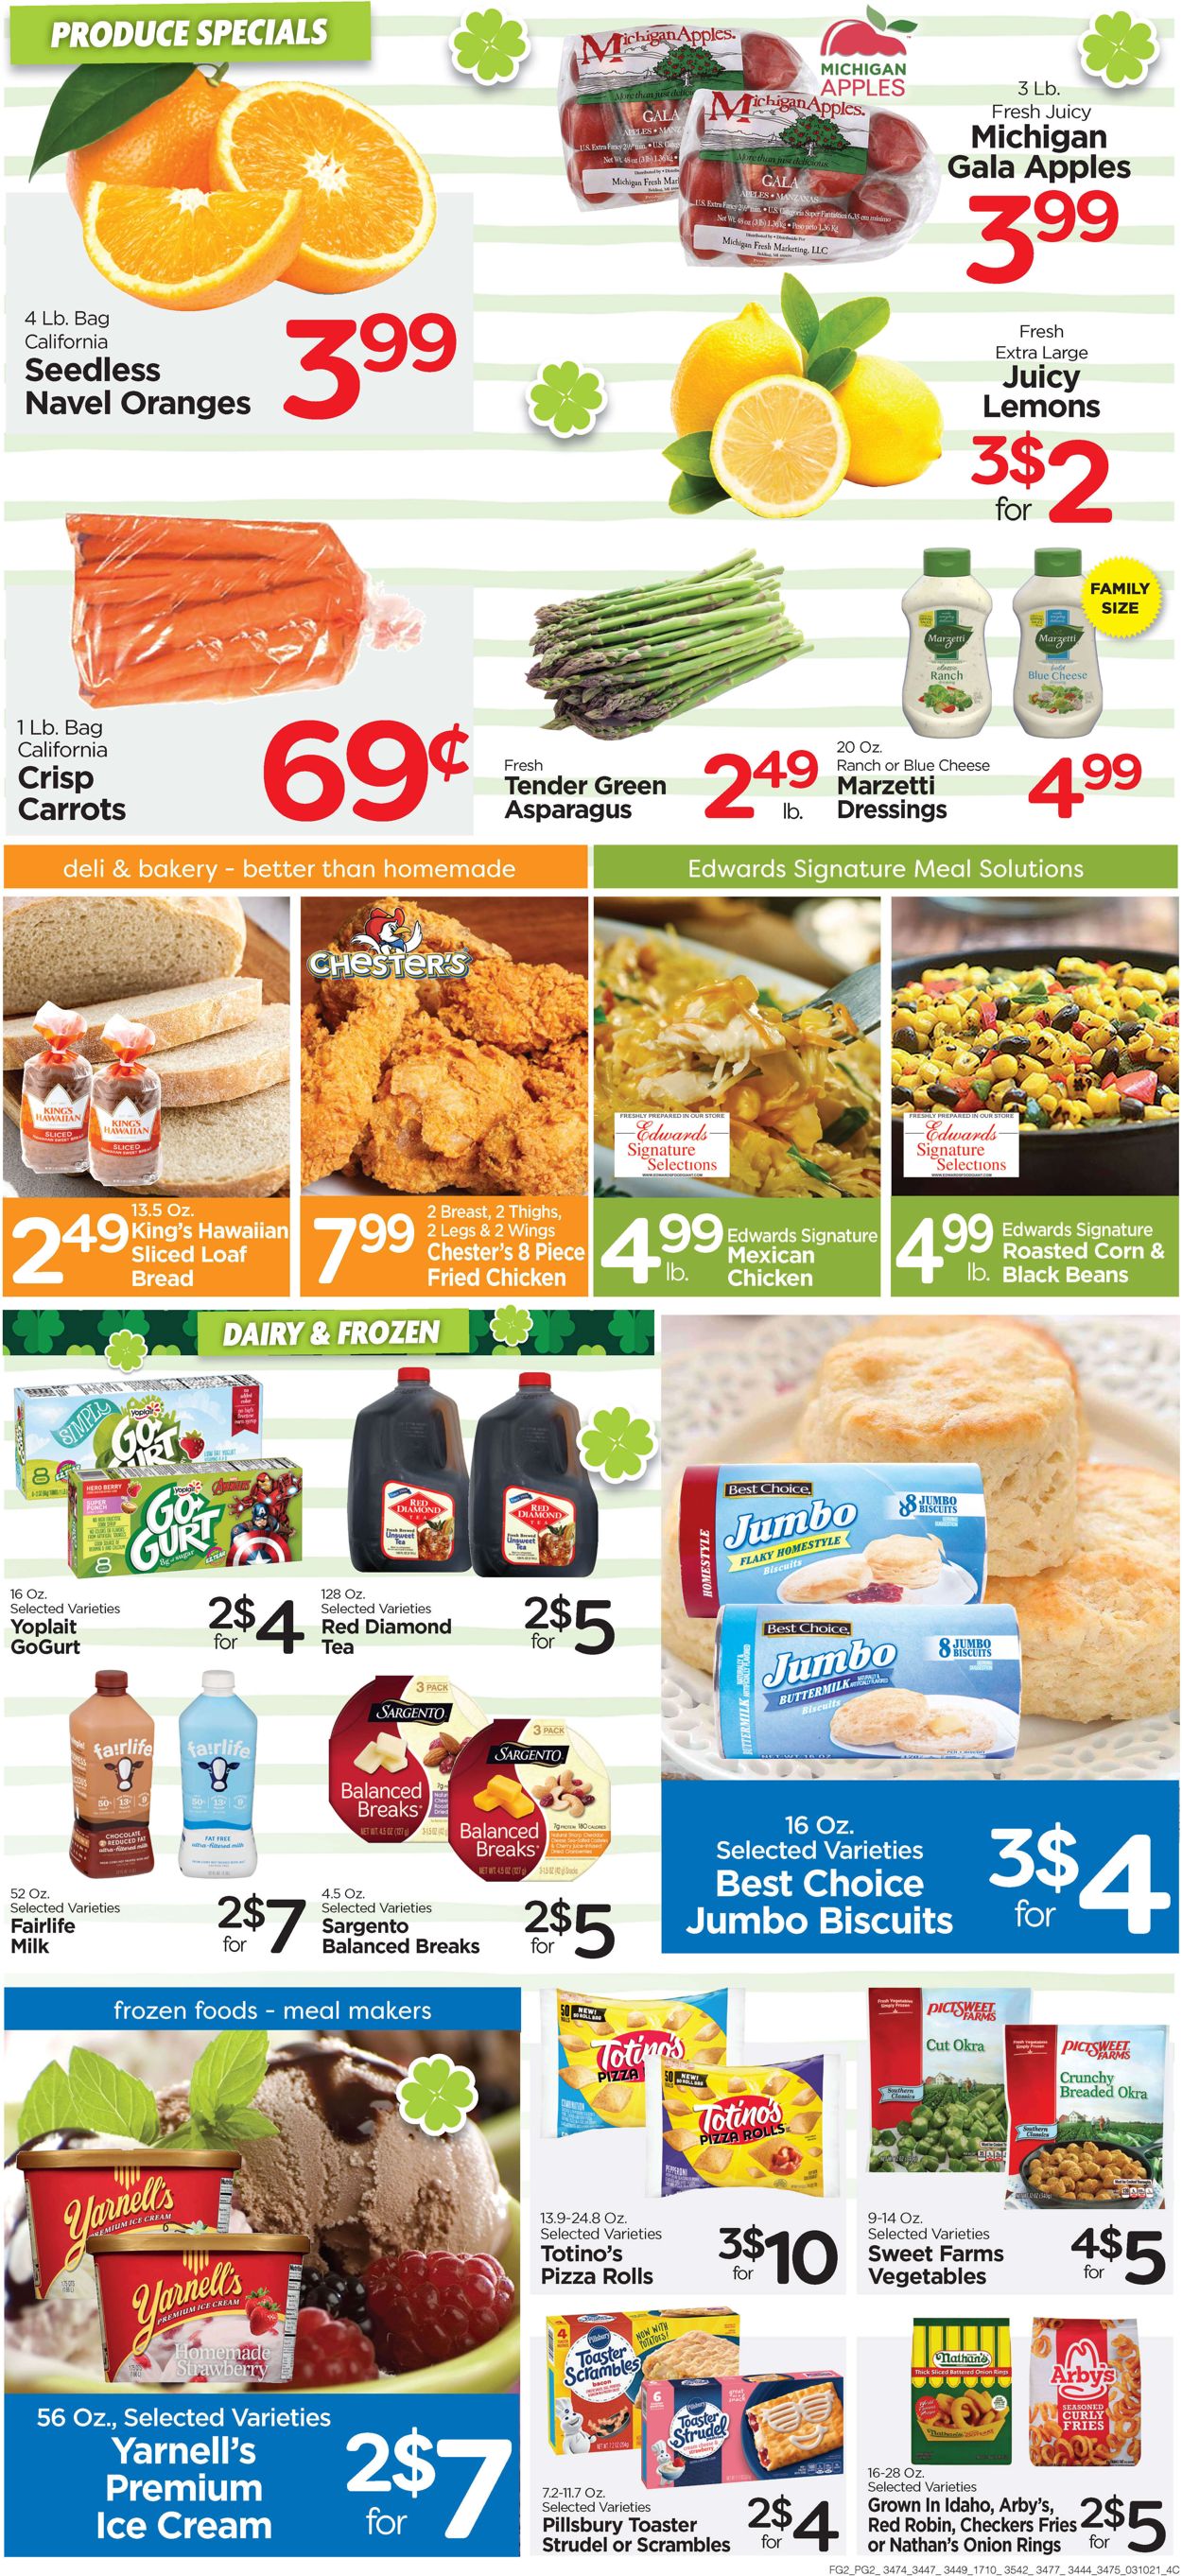 Catalogue Edwards Food Giant from 03/10/2021